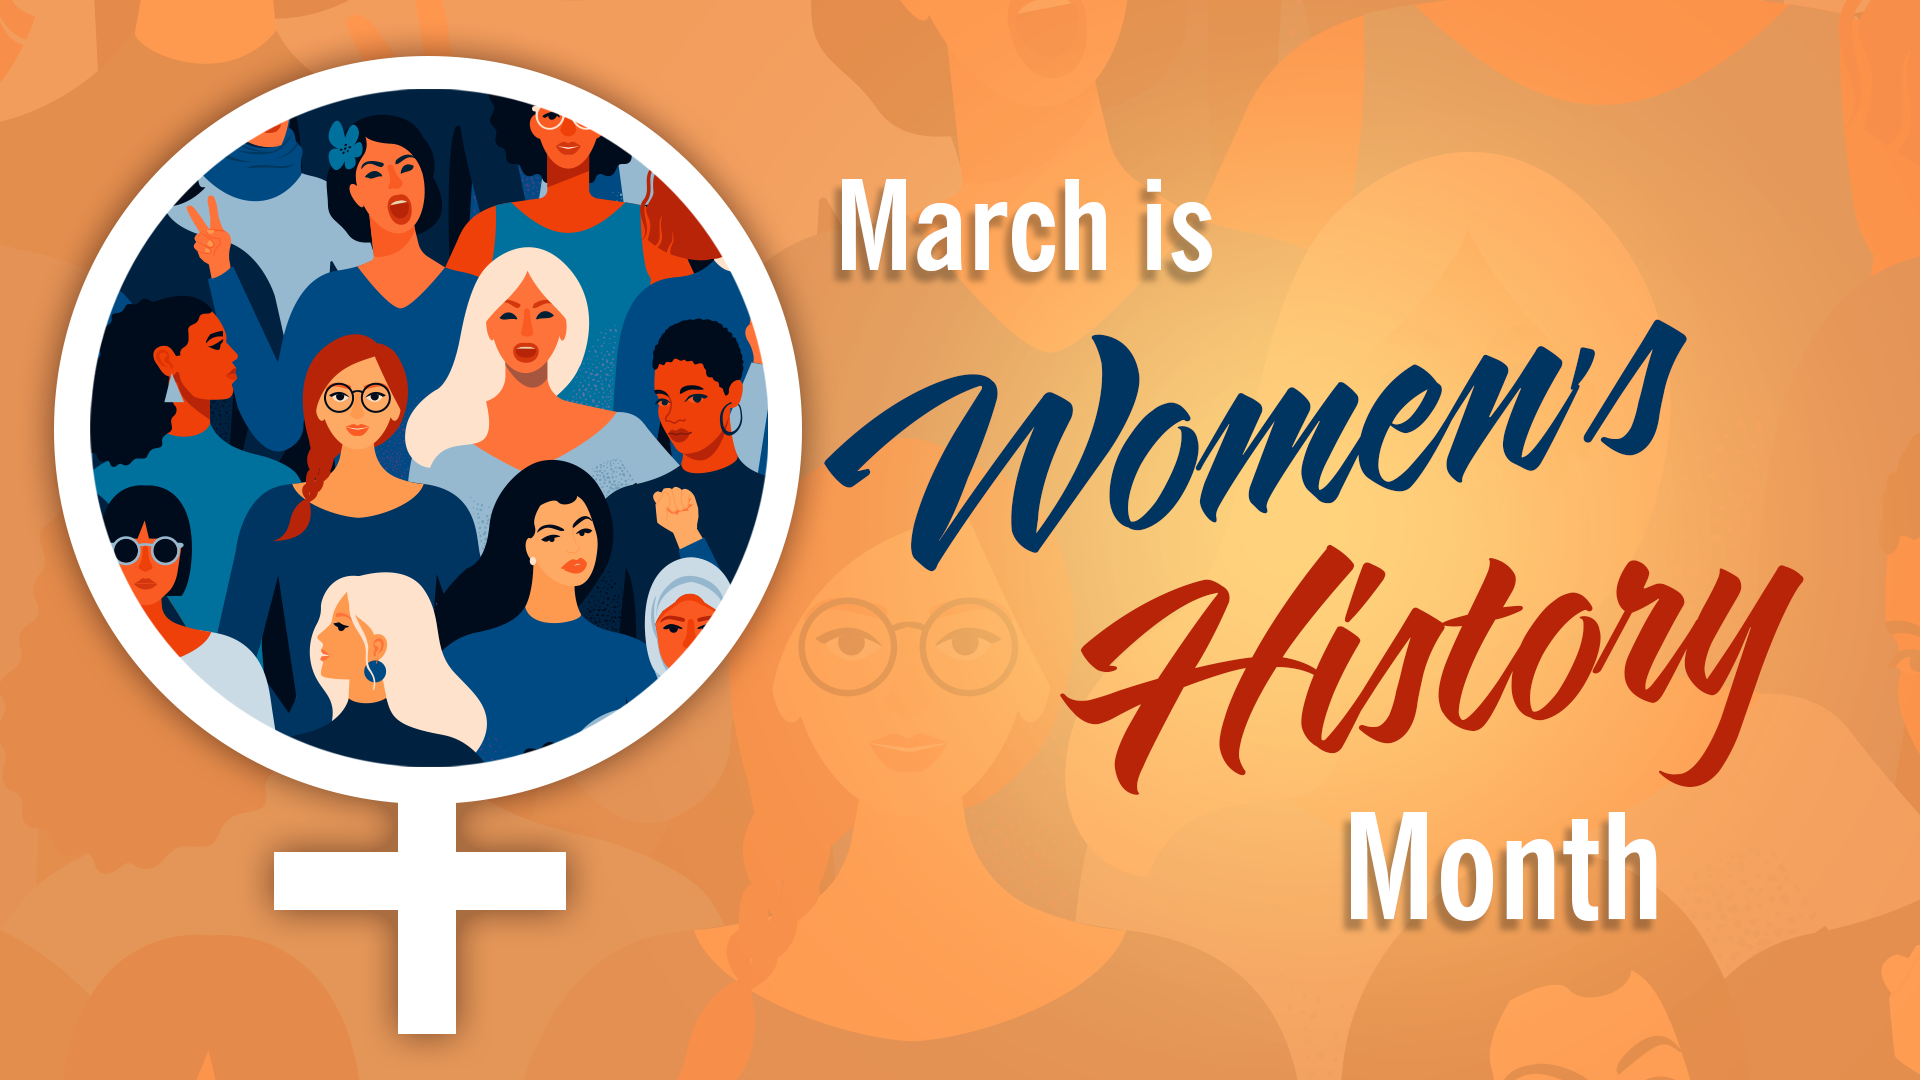 Free Graphic | Holidays | Women's History Month